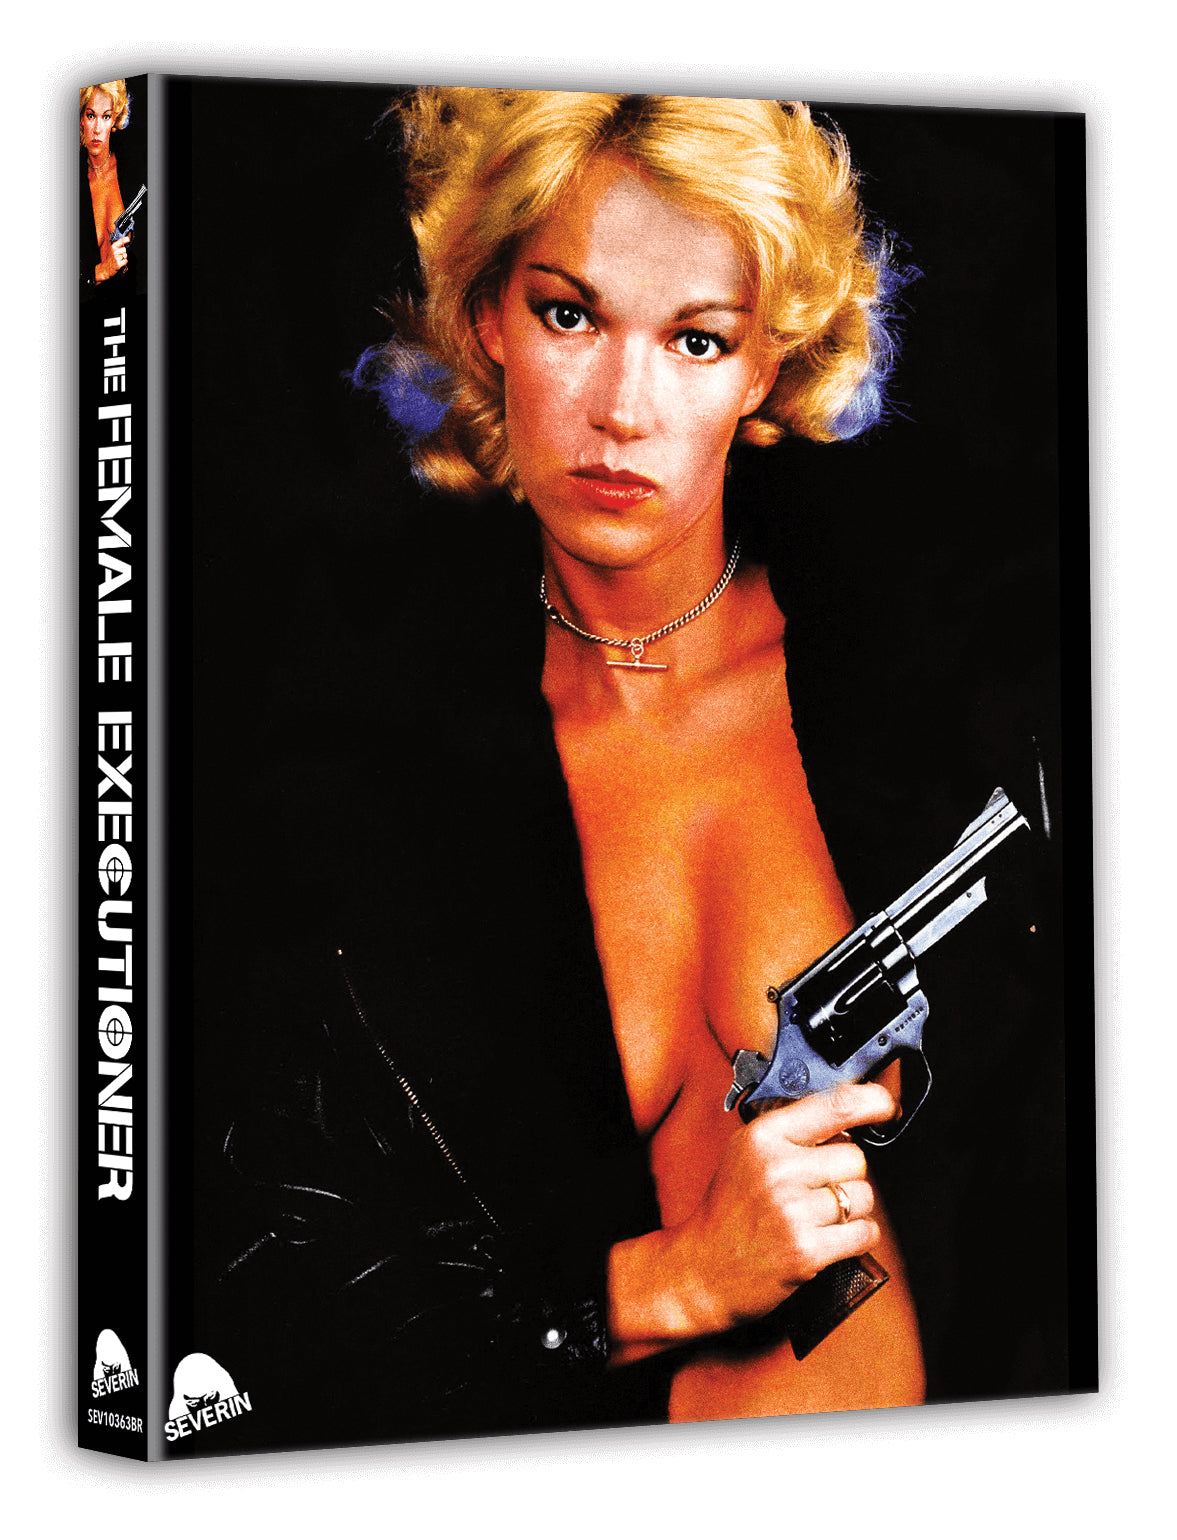 The Female Executioner Blu-ray with Slipcover (Severin Films)